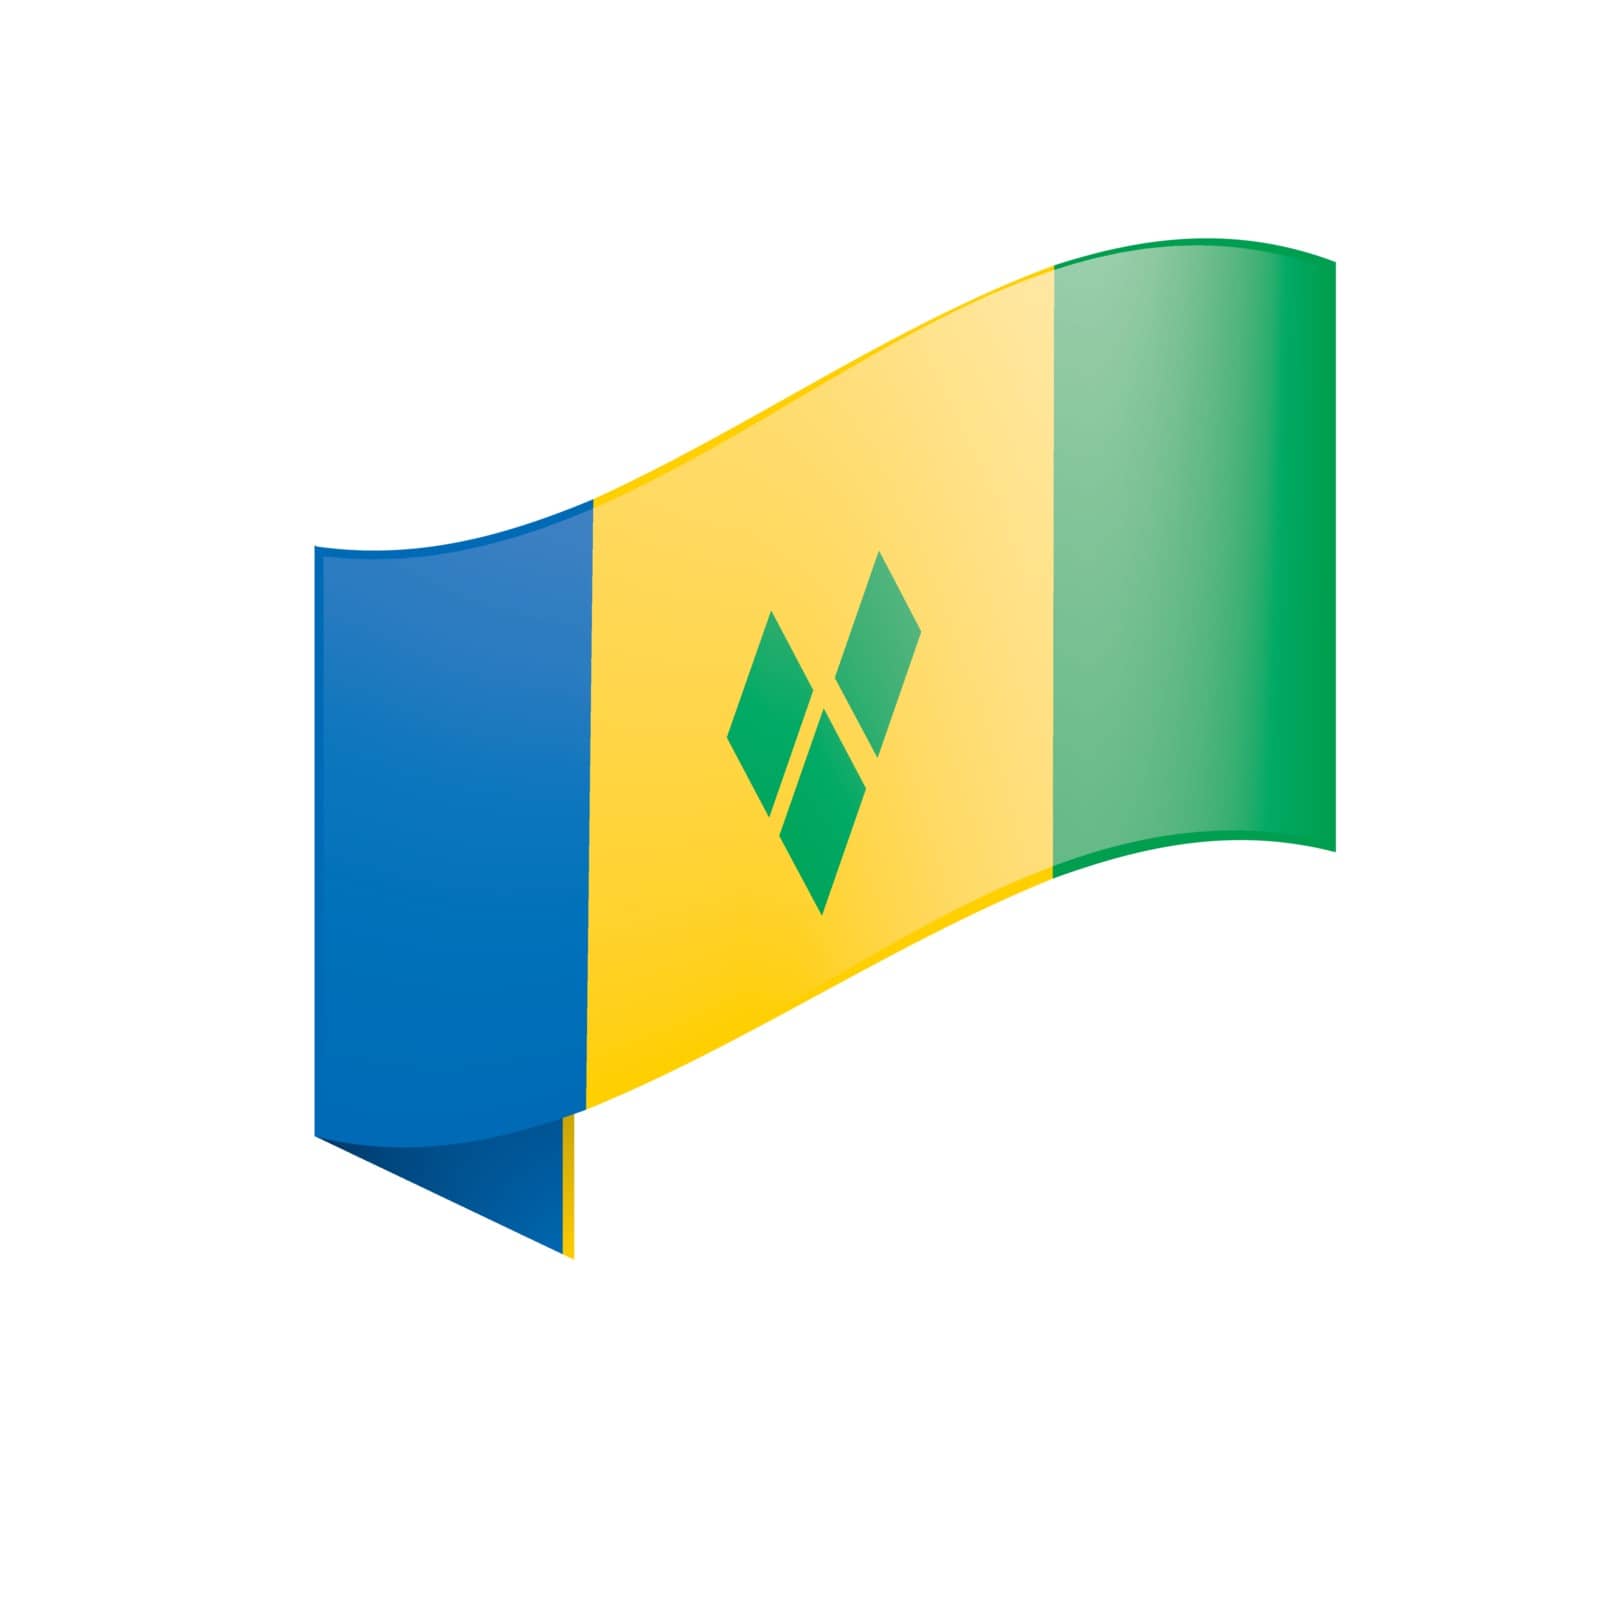 Saint Vincent and the Grenadines flag by butenkow